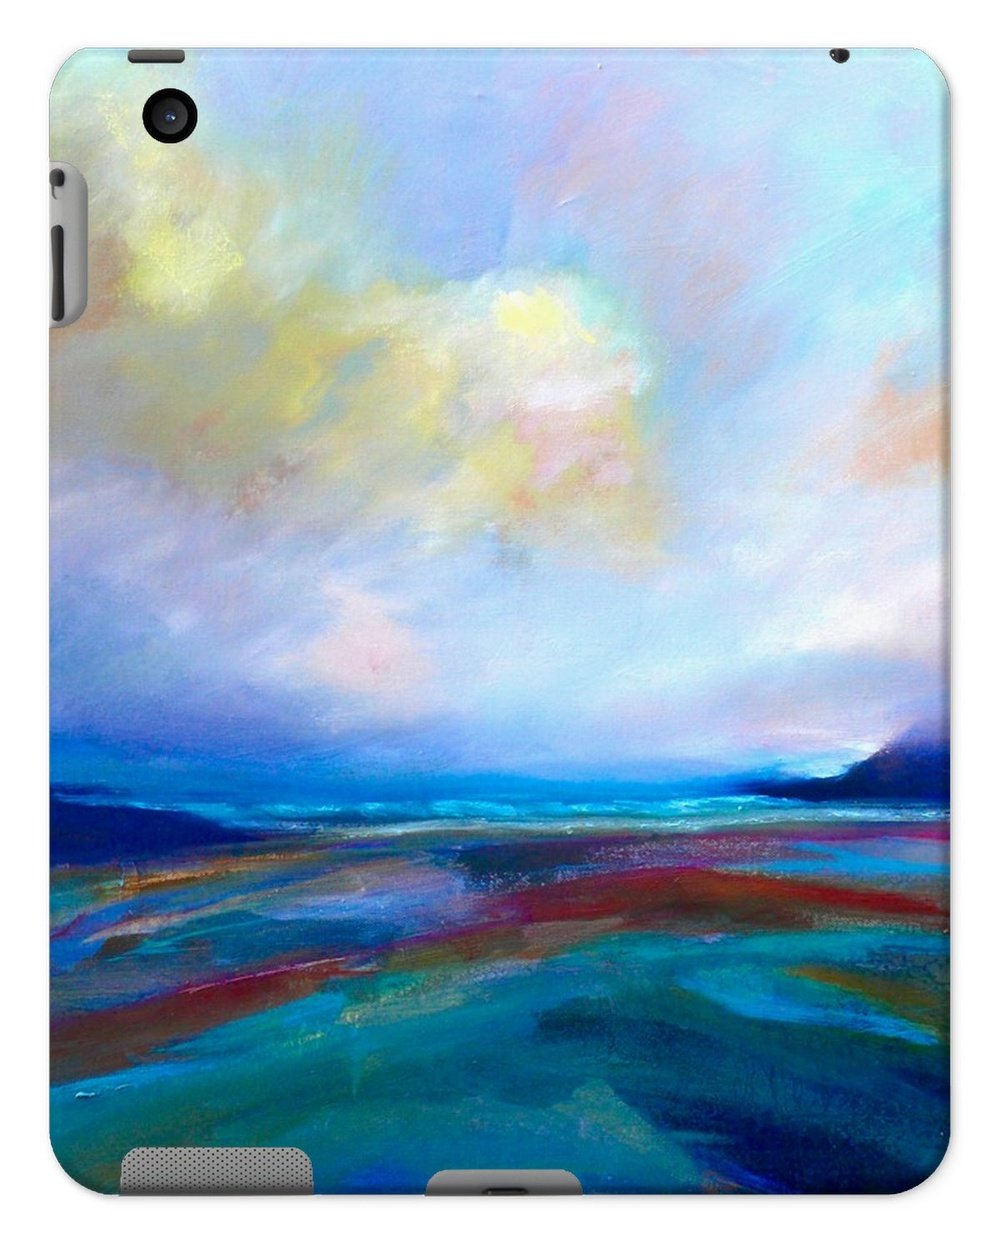 'Emotions run deep' Tablet Cases kite.ly